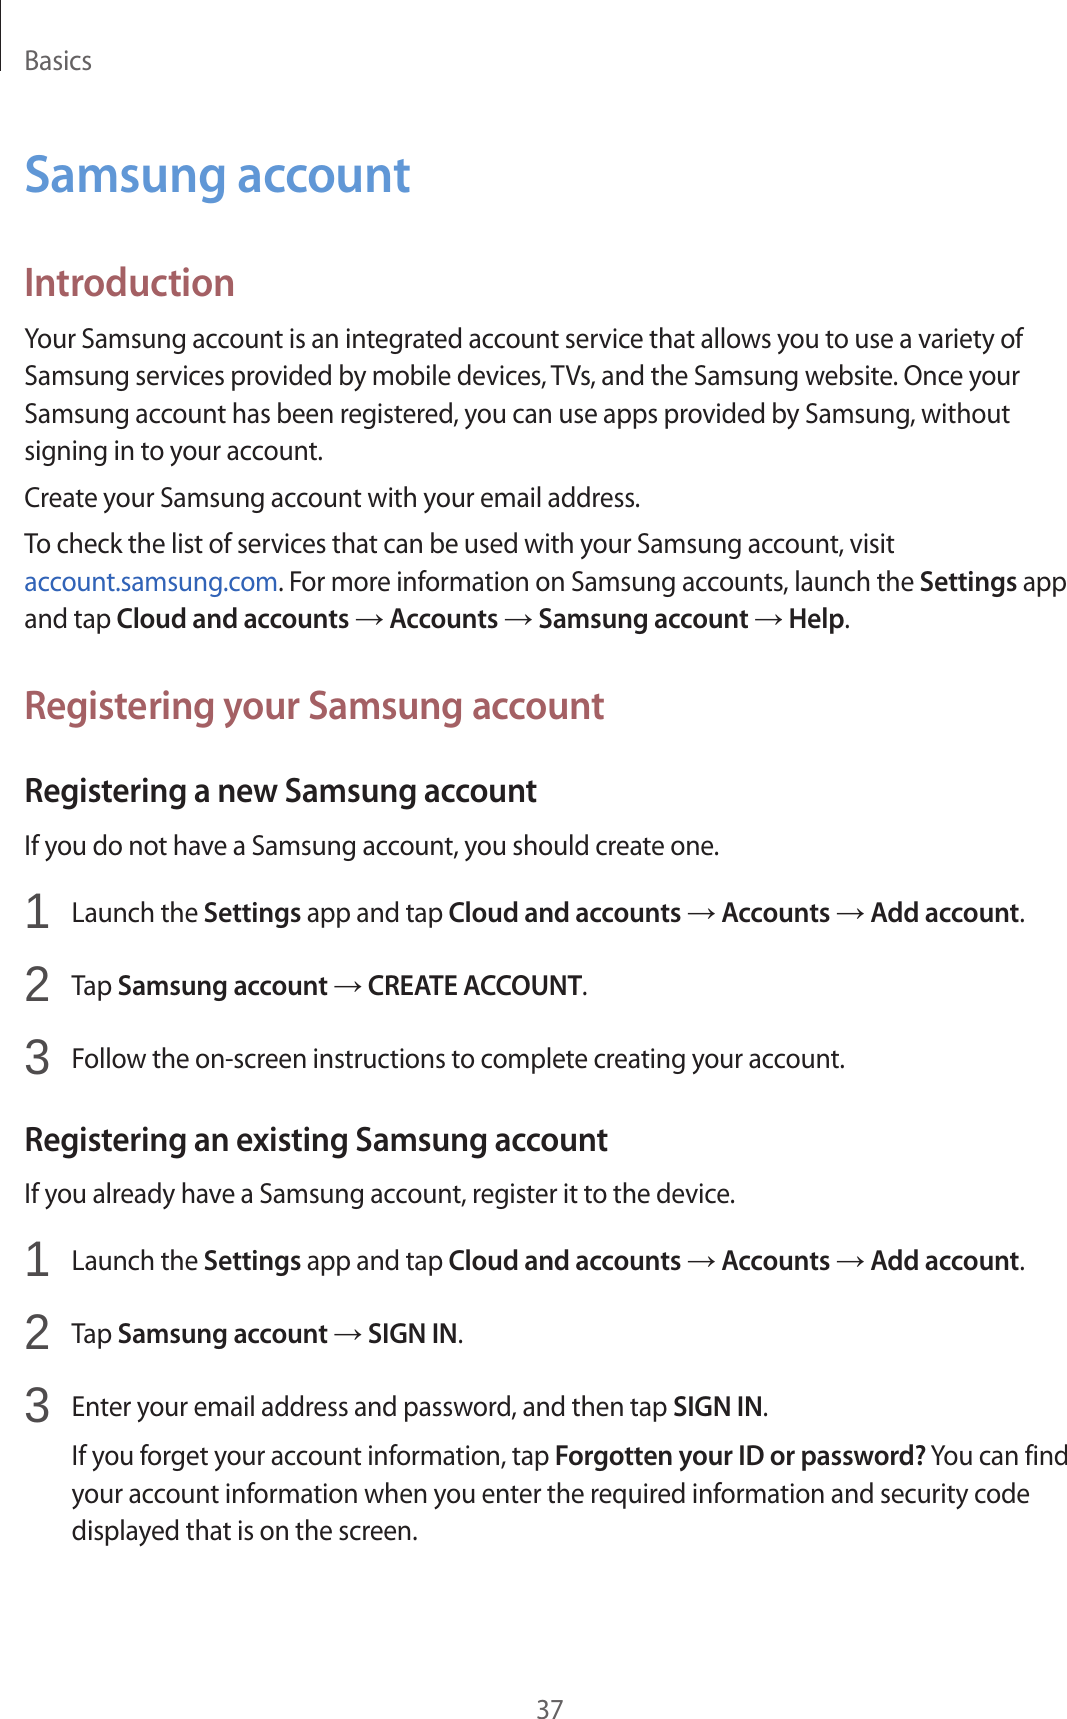 Basics37Samsung accountIntroductionYour Samsung account is an integrated account service that allows you to use a variety of Samsung services provided by mobile devices, TVs, and the Samsung website. Once your Samsung account has been registered, you can use apps provided by Samsung, without signing in to your account.Create your Samsung account with your email address.To check the list of services that can be used with your Samsung account, visit account.samsung.com. For more information on Samsung accounts, launch the Settings app and tap Cloud and accounts → Accounts → Samsung account → Help.Registering your Samsung accountRegistering a new Samsung accountIf you do not have a Samsung account, you should create one.1  Launch the Settings app and tap Cloud and accounts → Accounts → Add account.2  Tap Samsung account → CREATE ACCOUNT.3  Follow the on-screen instructions to complete creating your account.Registering an existing Samsung accountIf you already have a Samsung account, register it to the device.1  Launch the Settings app and tap Cloud and accounts → Accounts → Add account.2  Tap Samsung account → SIGN IN.3  Enter your email address and password, and then tap SIGN IN.If you forget your account information, tap Forgotten your ID or password? You can find your account information when you enter the required information and security code displayed that is on the screen.